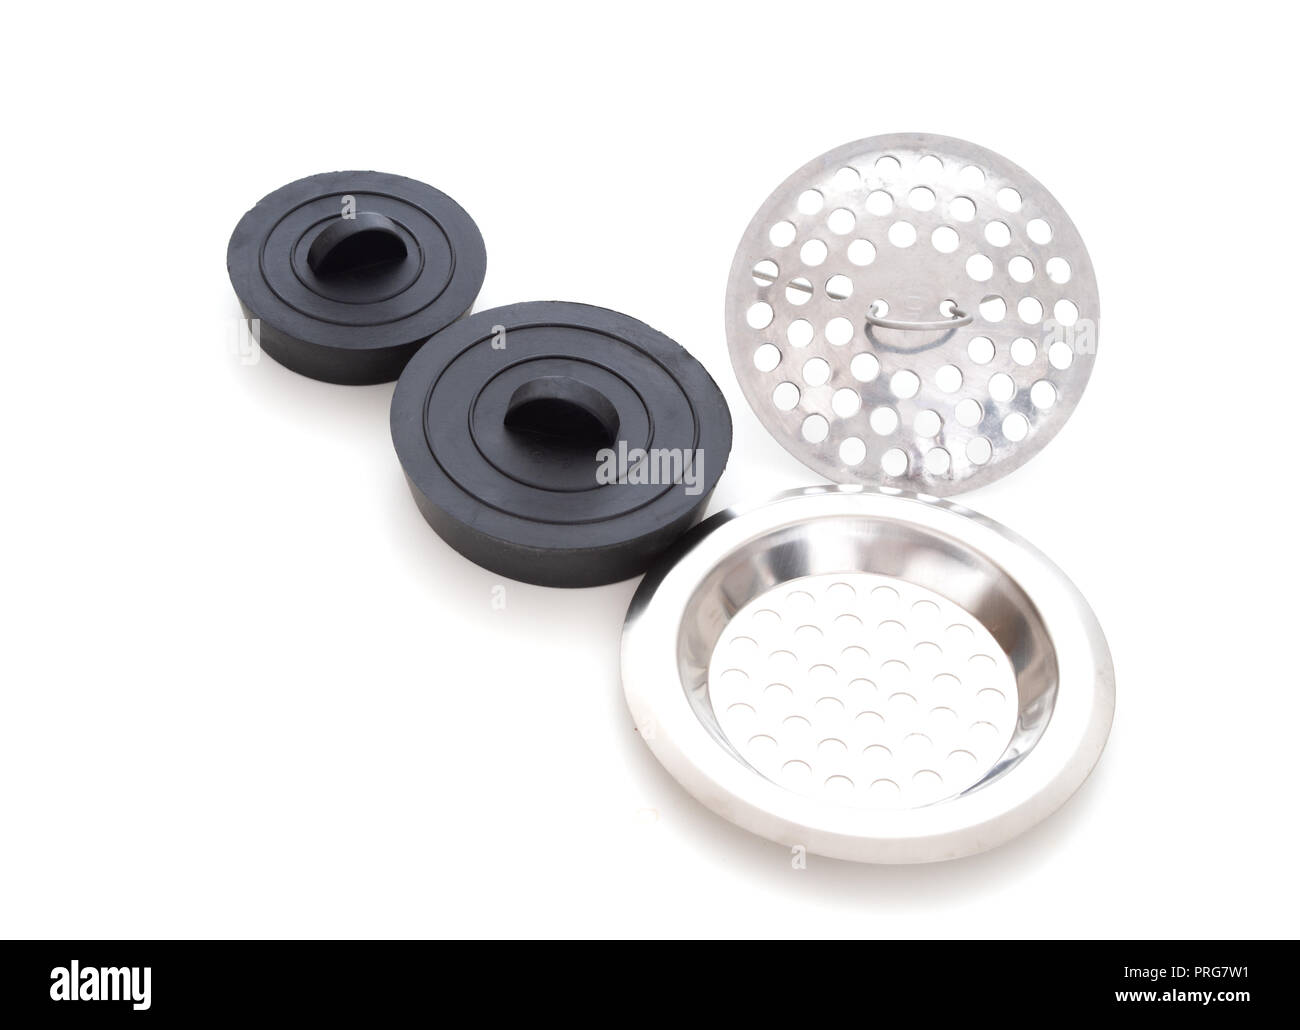 Sink strainers and black rubber domestuic plugs on white background. Stock Photo